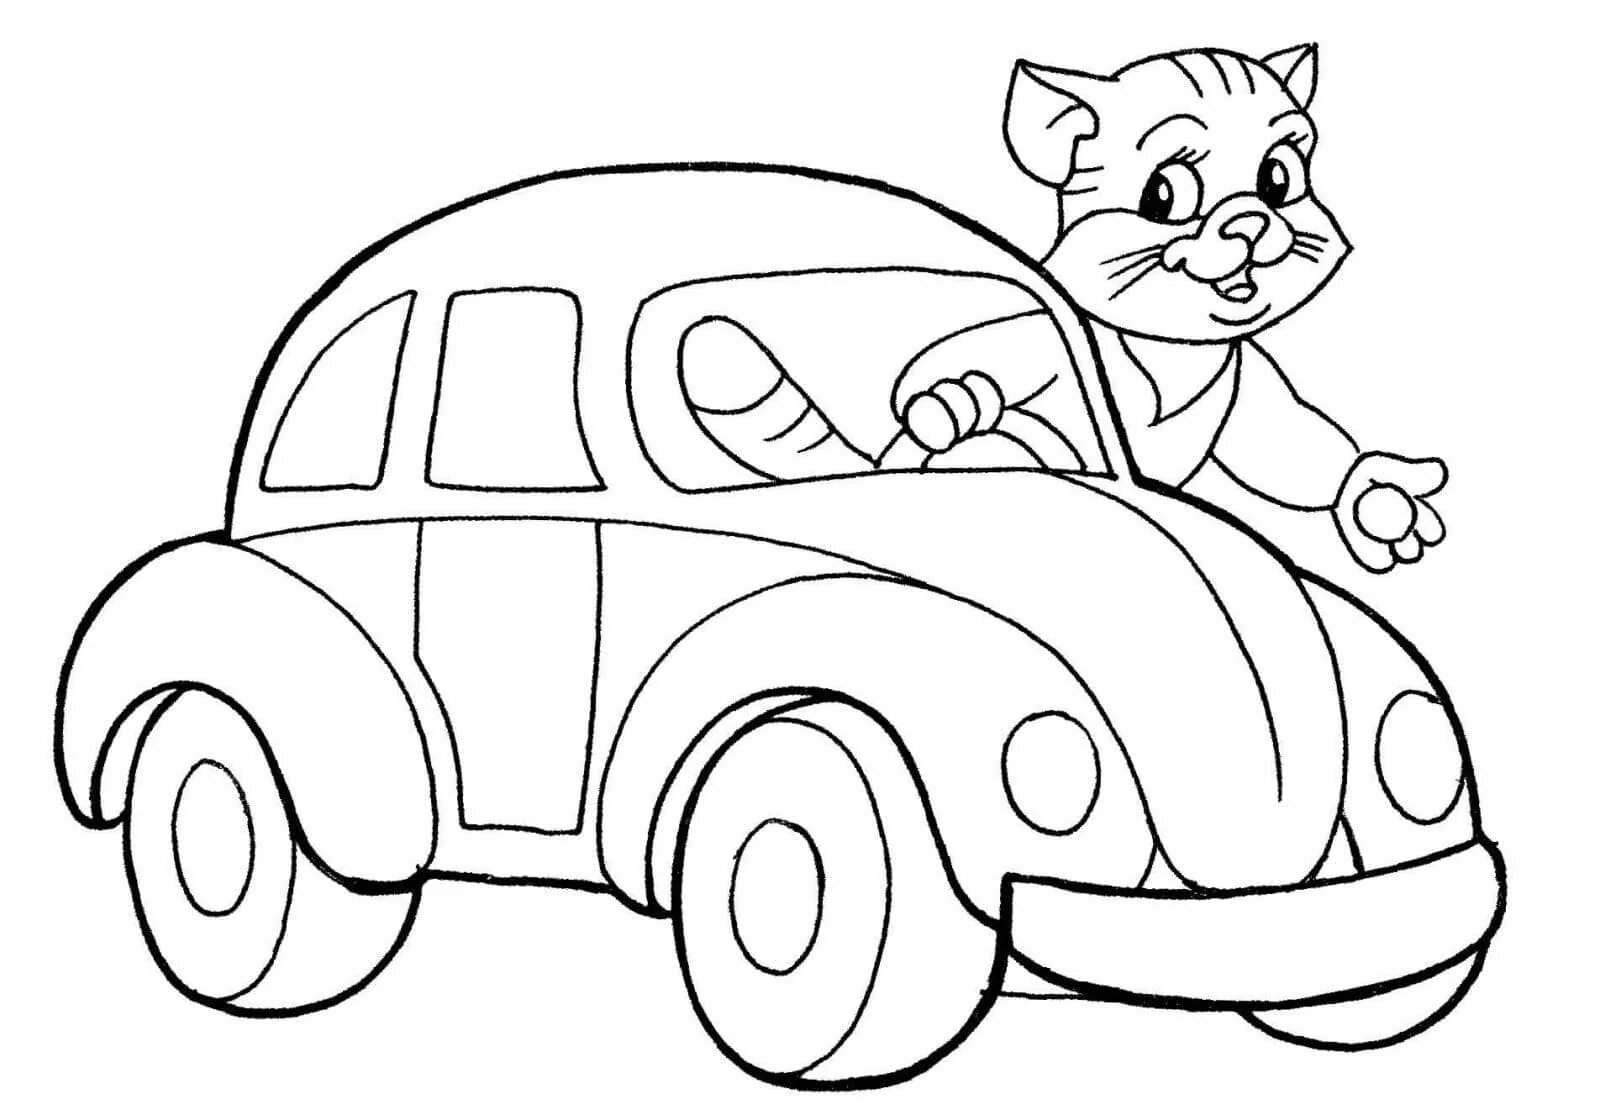 Coloring book innovative 4 year old car